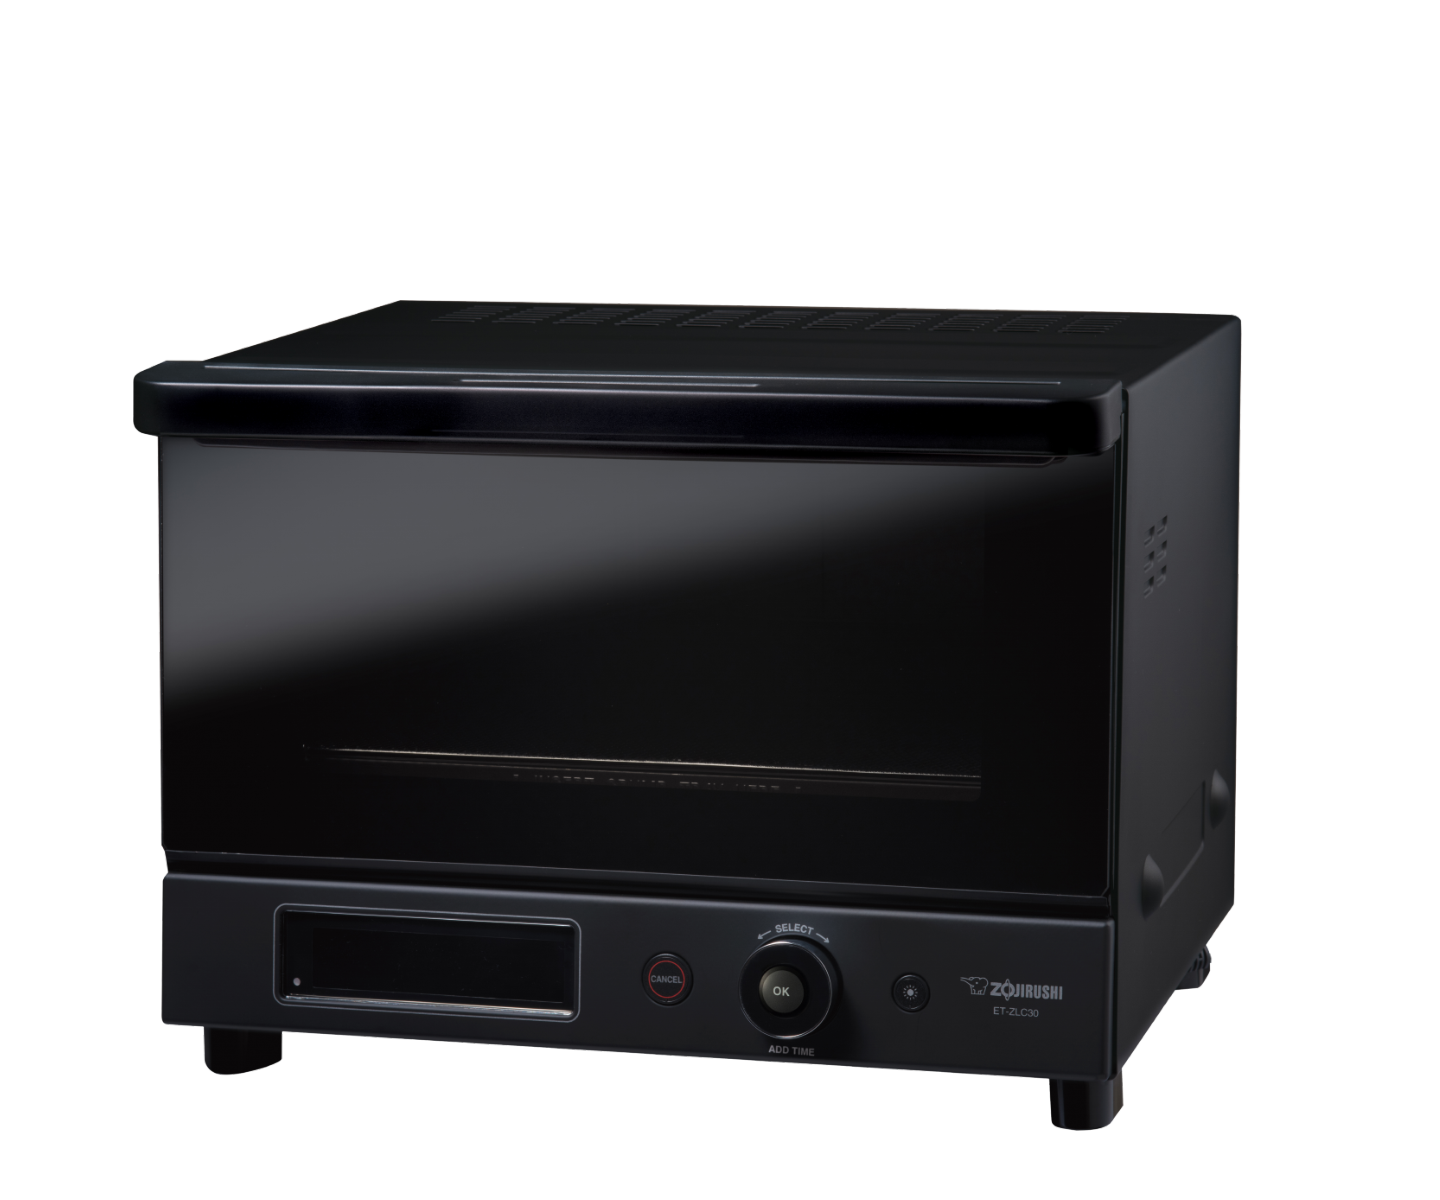 How To Test The Accuracy of Your Toaster Oven's Temperature?